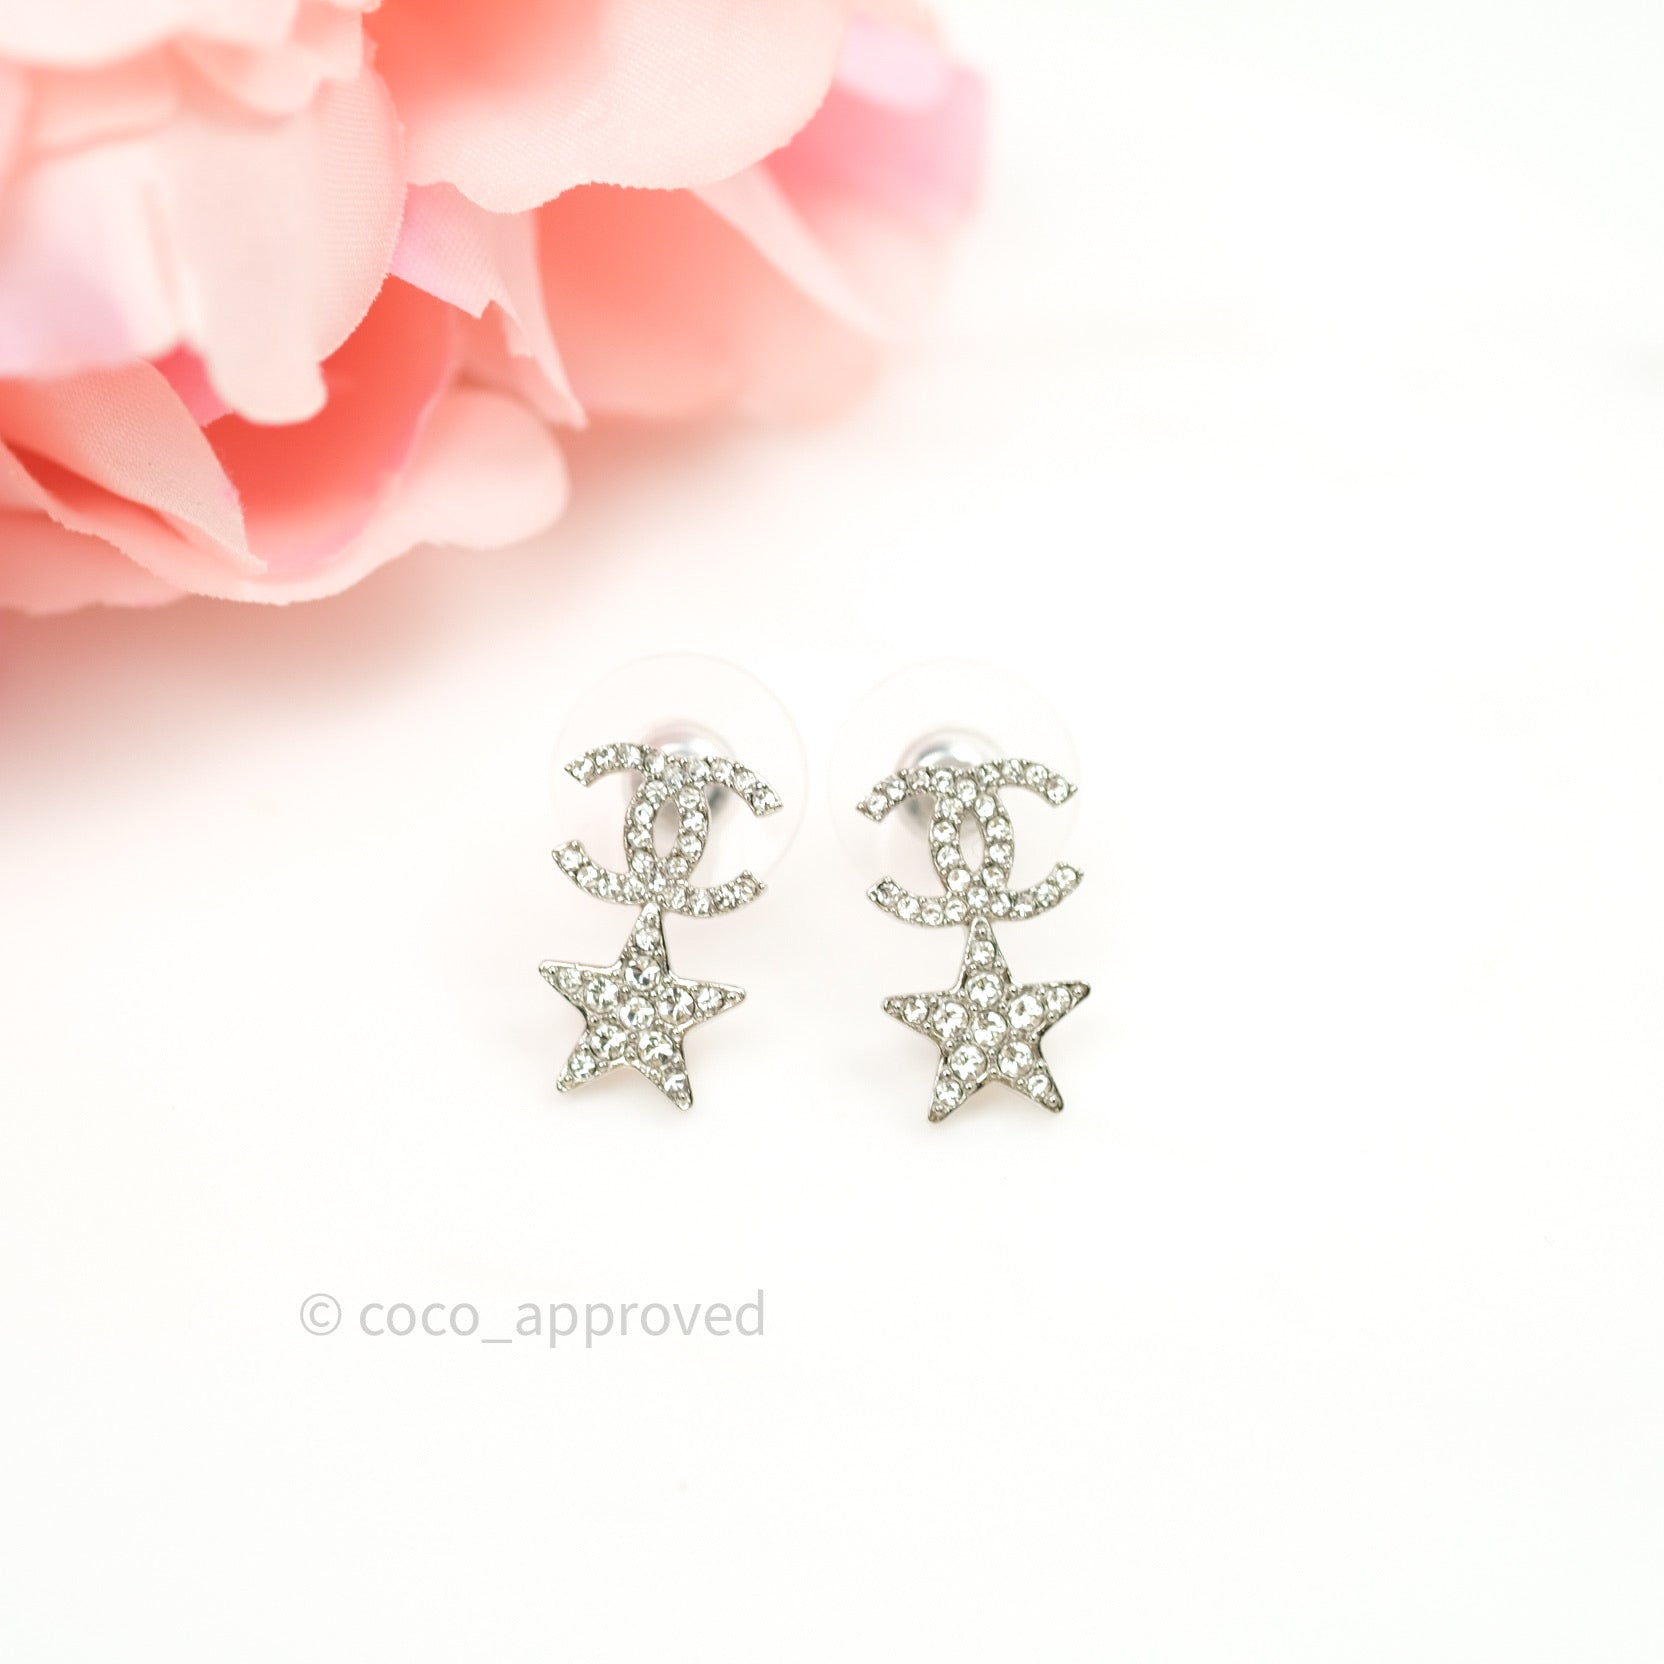 Chanel Crystal CC Star Earrings Silver 20B – Coco Approved Studio